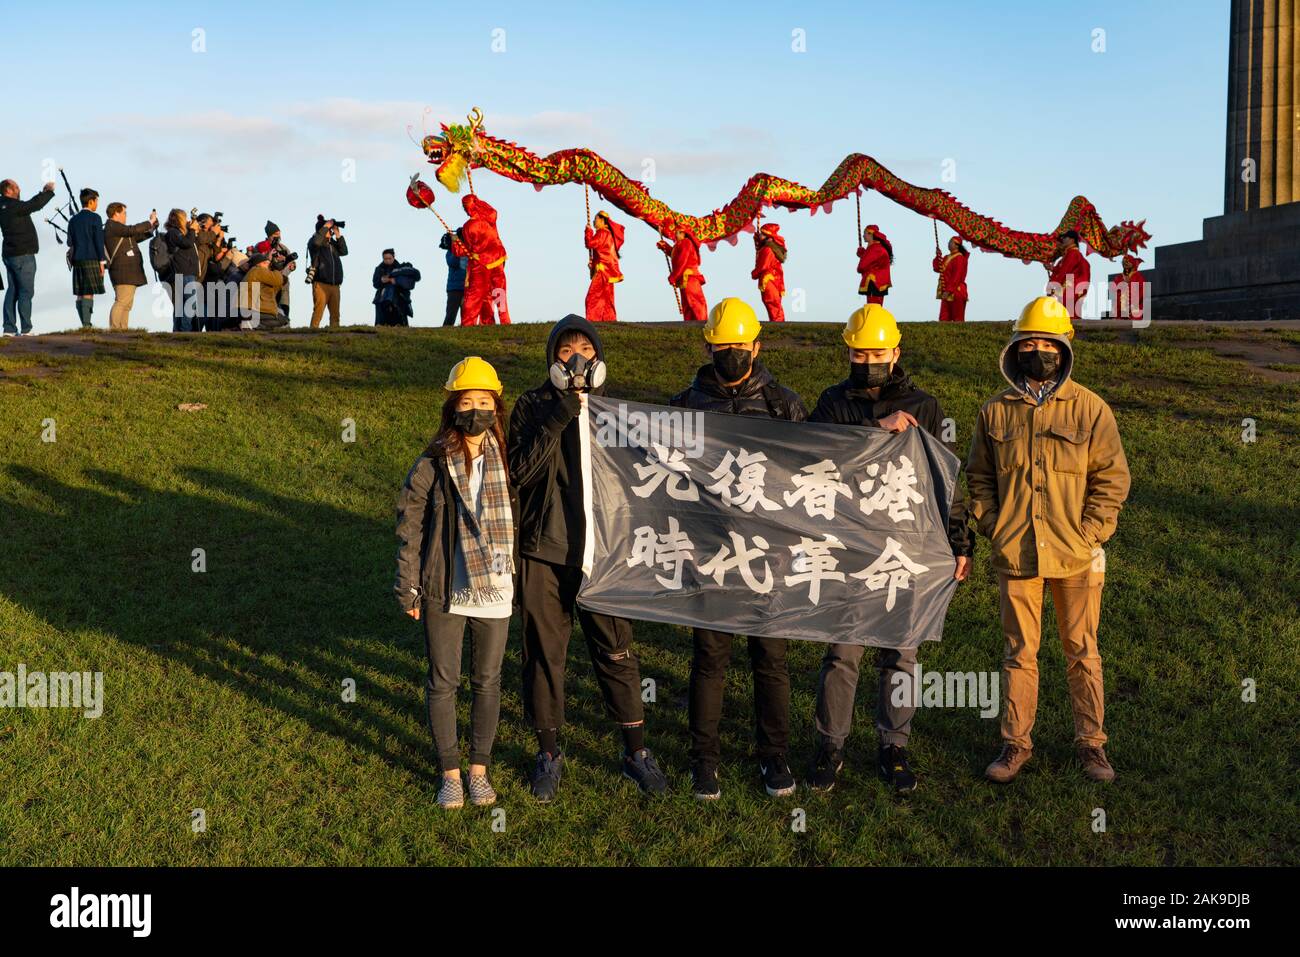 Edinburgh, Scotland, UK. 8th Jan 2020. Hong Kong pro democracy supporters stage demonstration during official Chinese New Year dragon dance event on Calton Hill in Edinburgh. The protest occurred during official photo call to mark start of Chinese New Year and the Year of the Rat. Iain Masterton/Alamy Live News Stock Photo